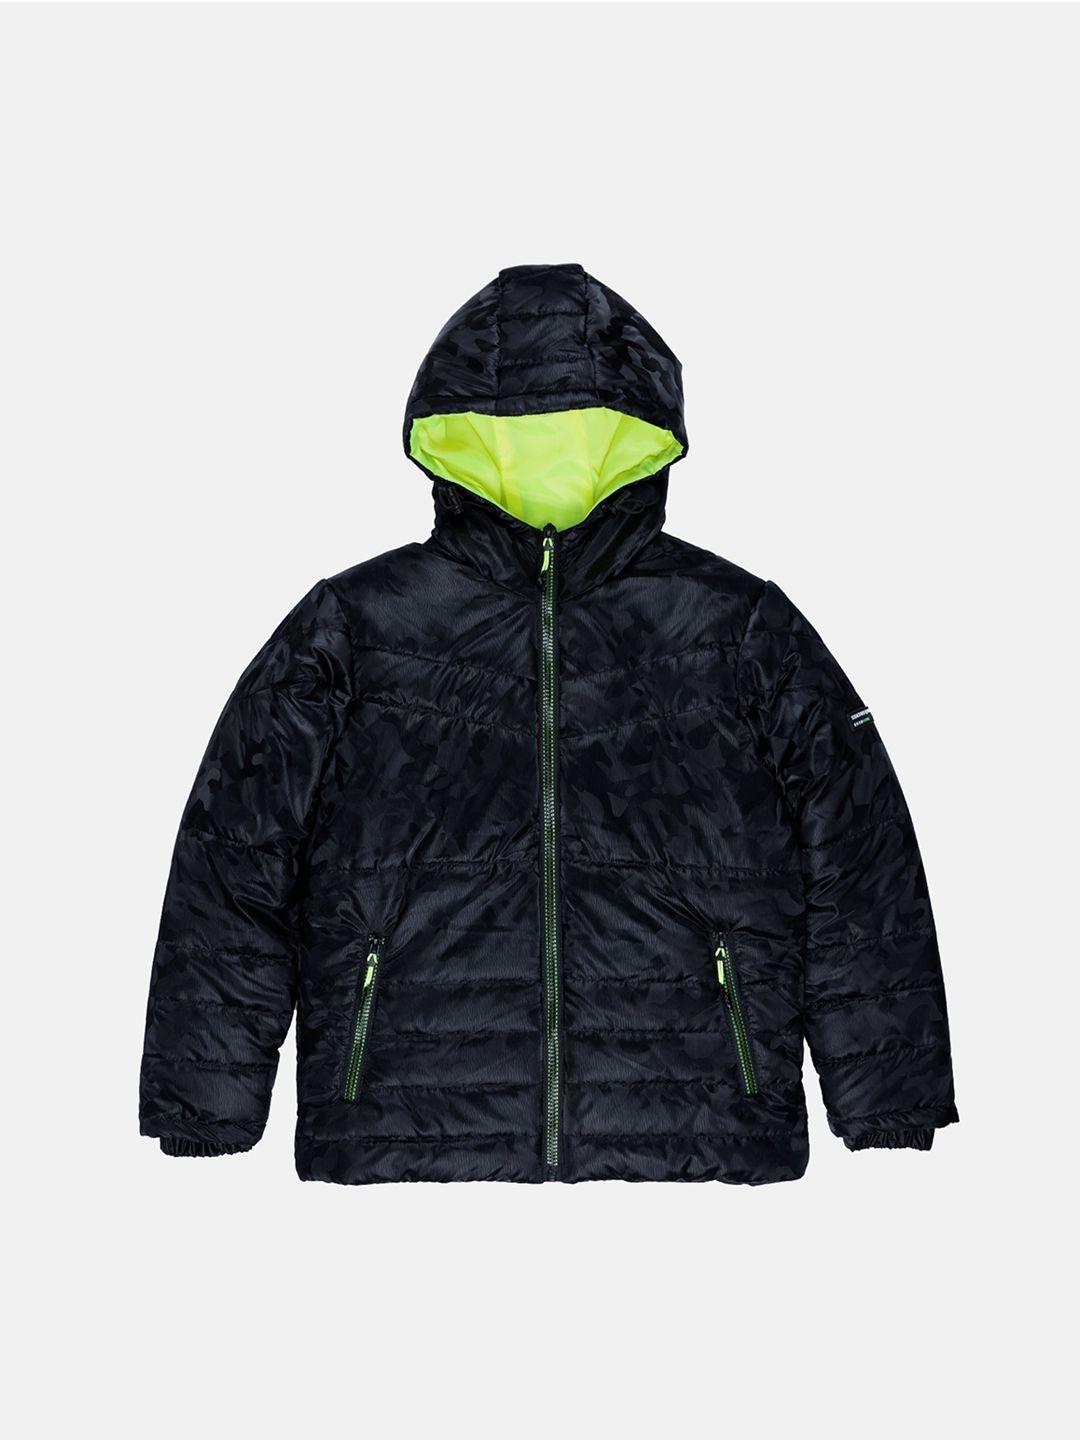 status quo boys black quilted jacket